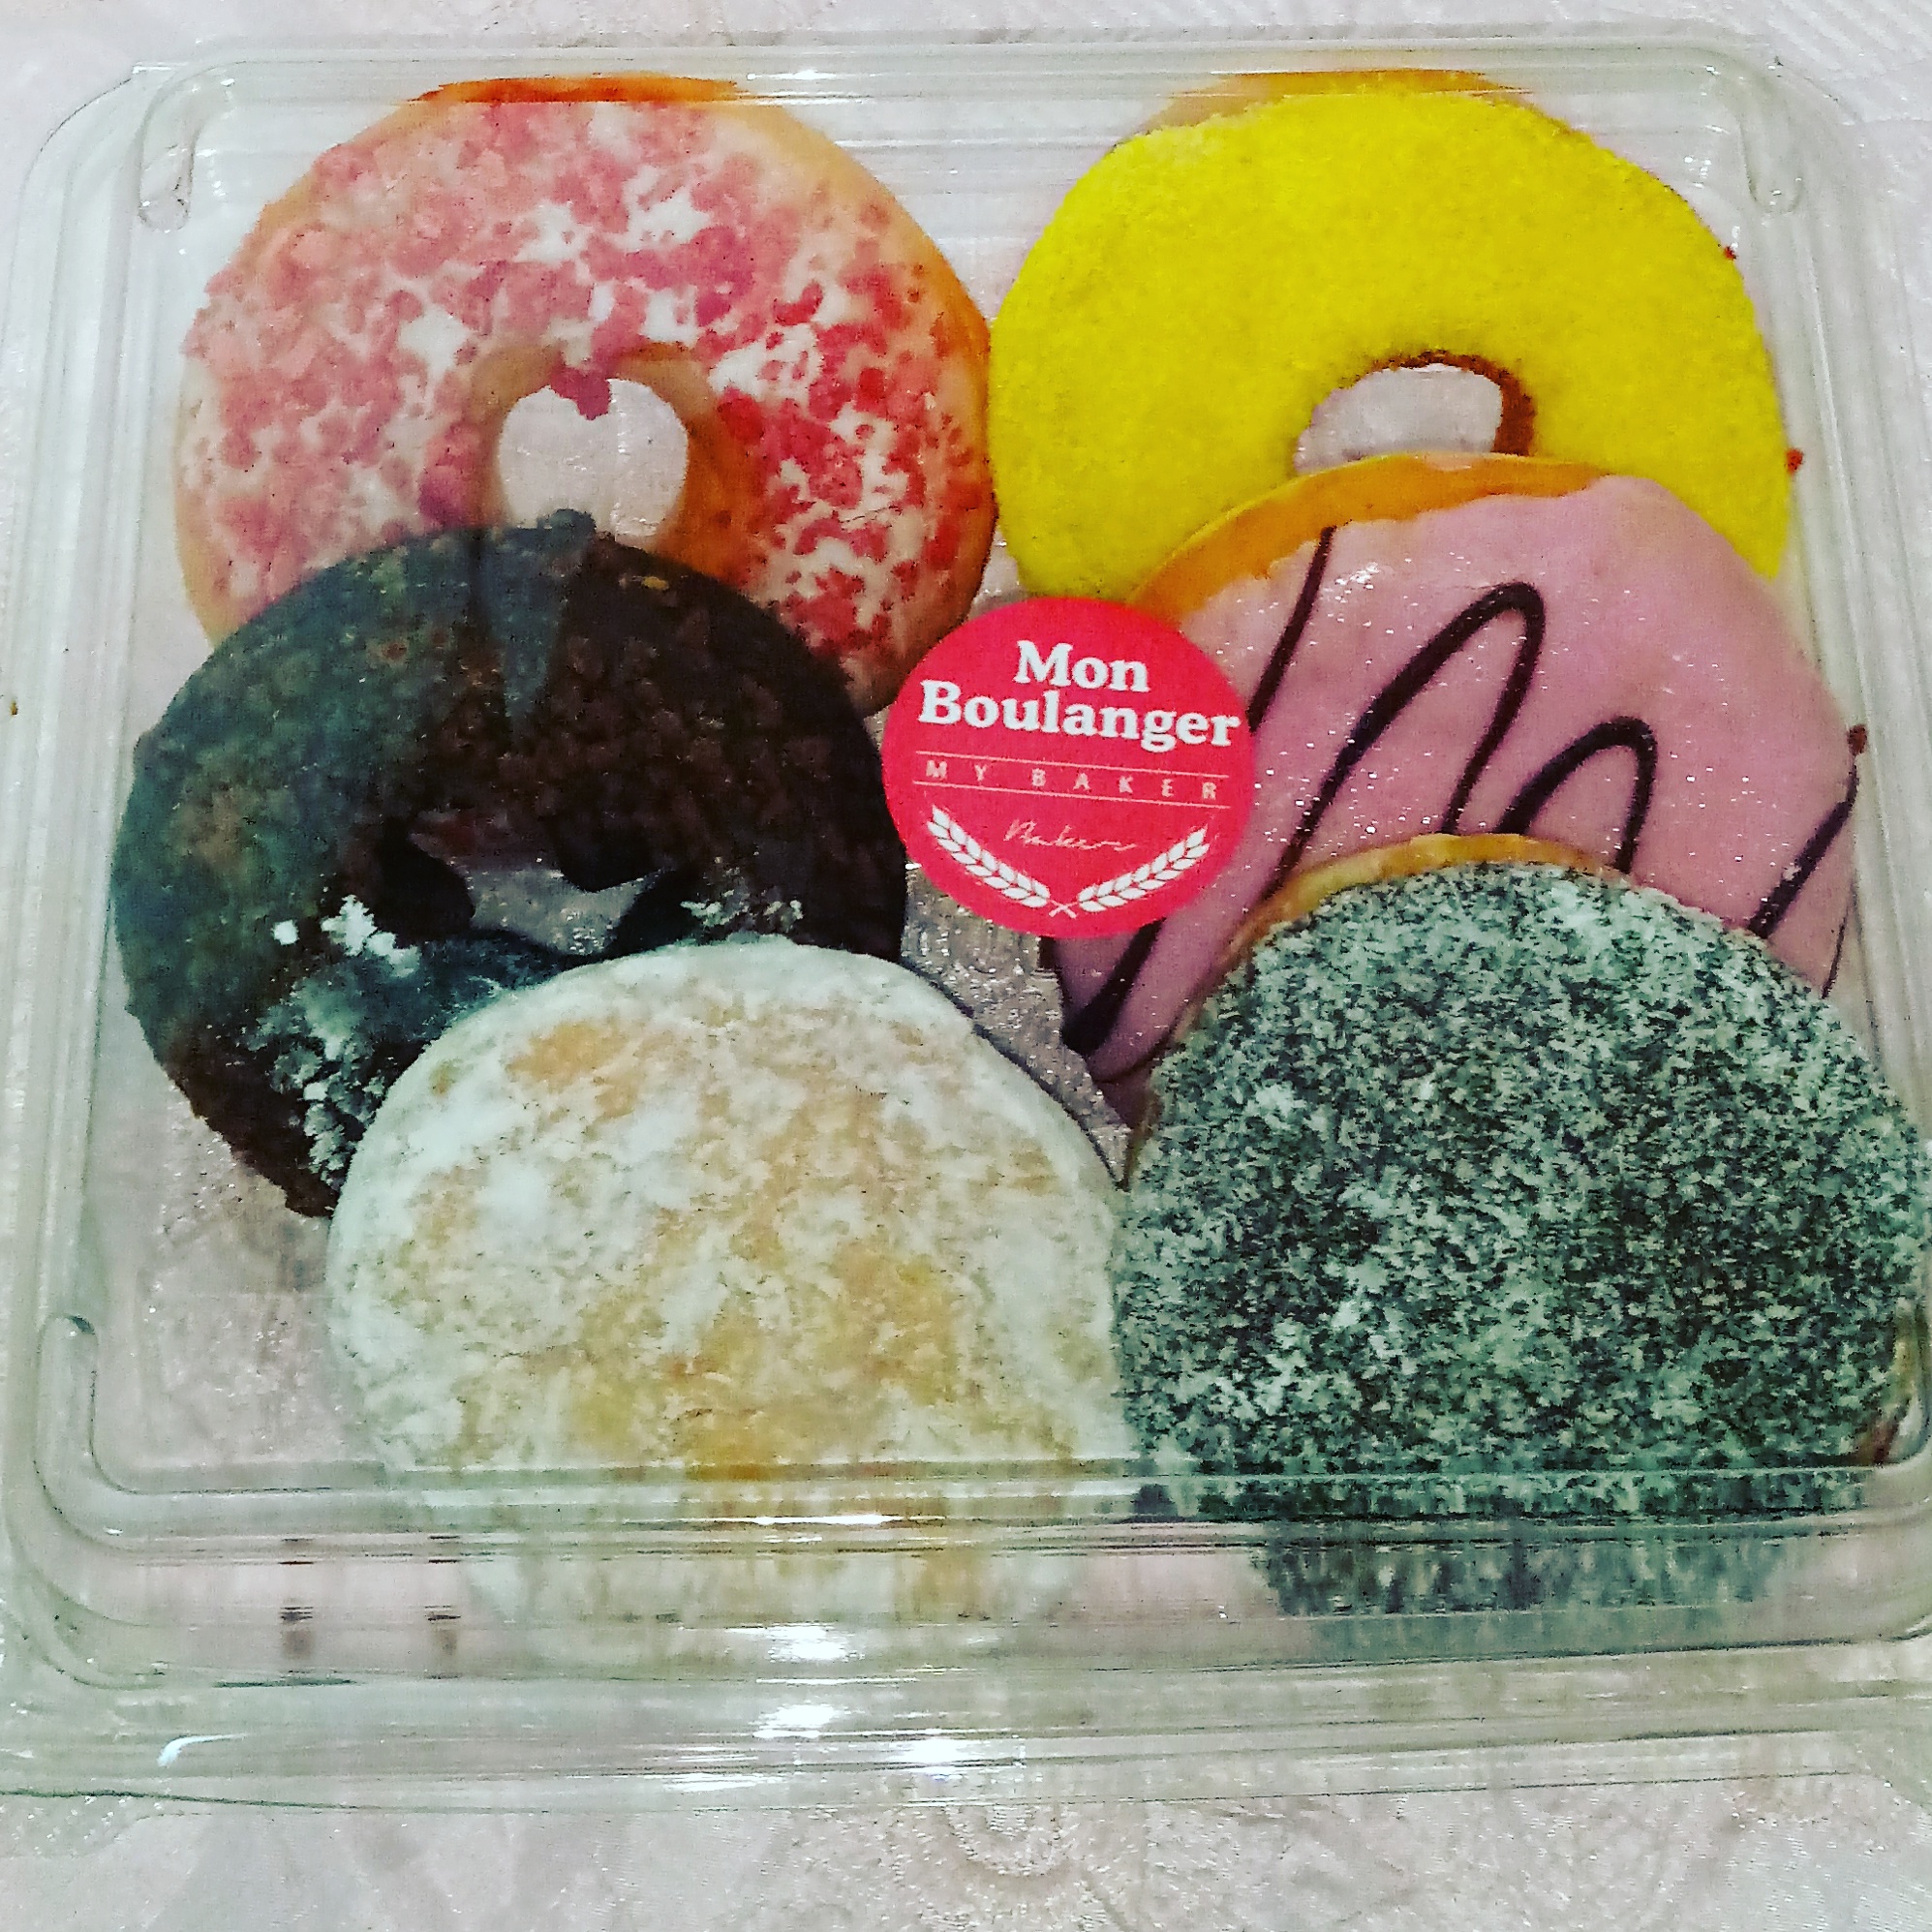 My favorite donuts